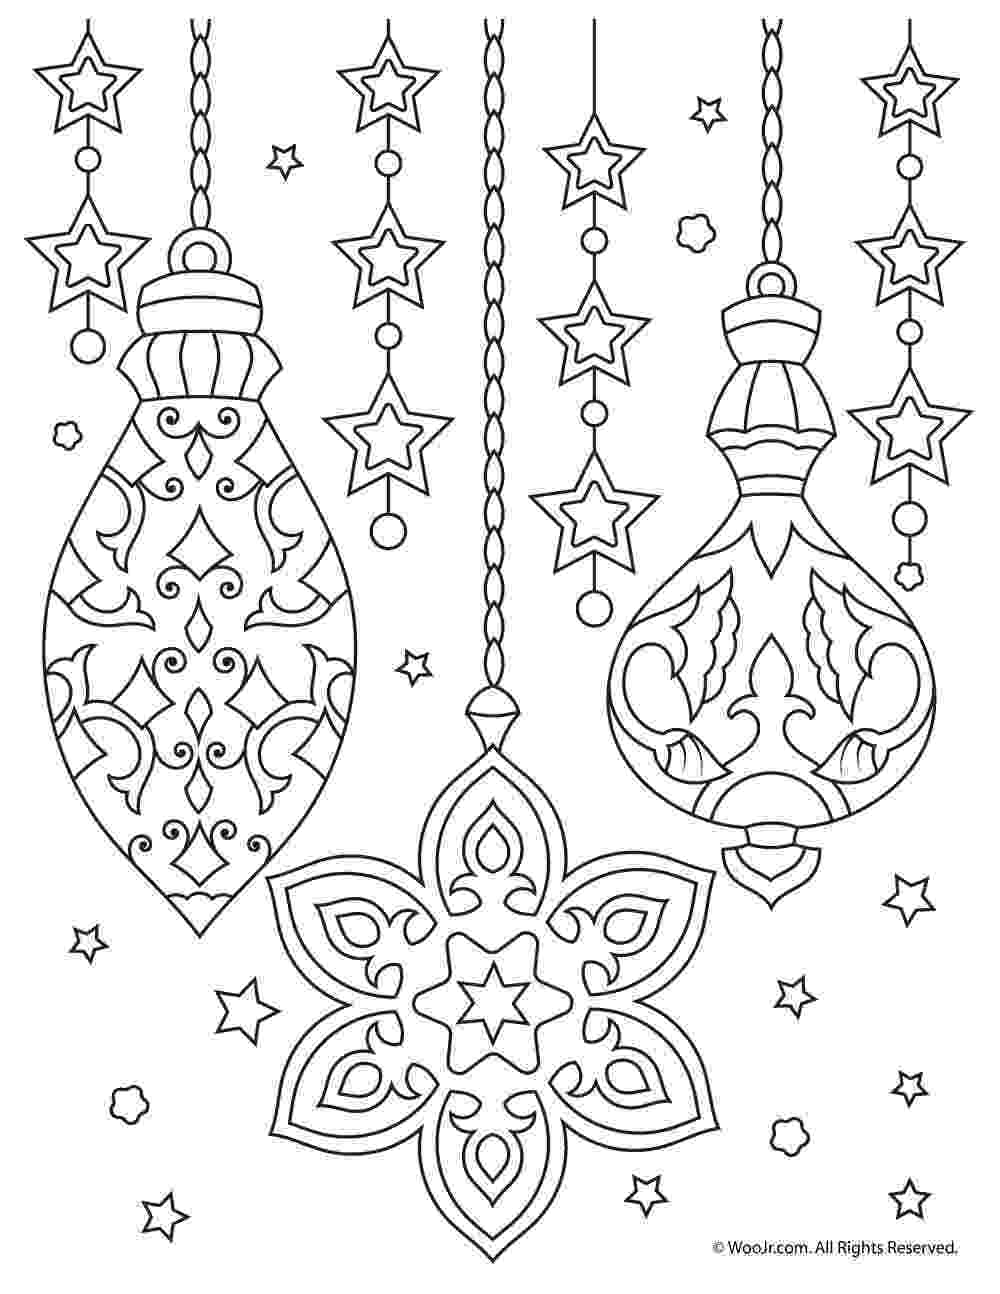 xmas colouring pages for adults 101 best christmas coloring pages for kids adults printable colouring for xmas pages adults 